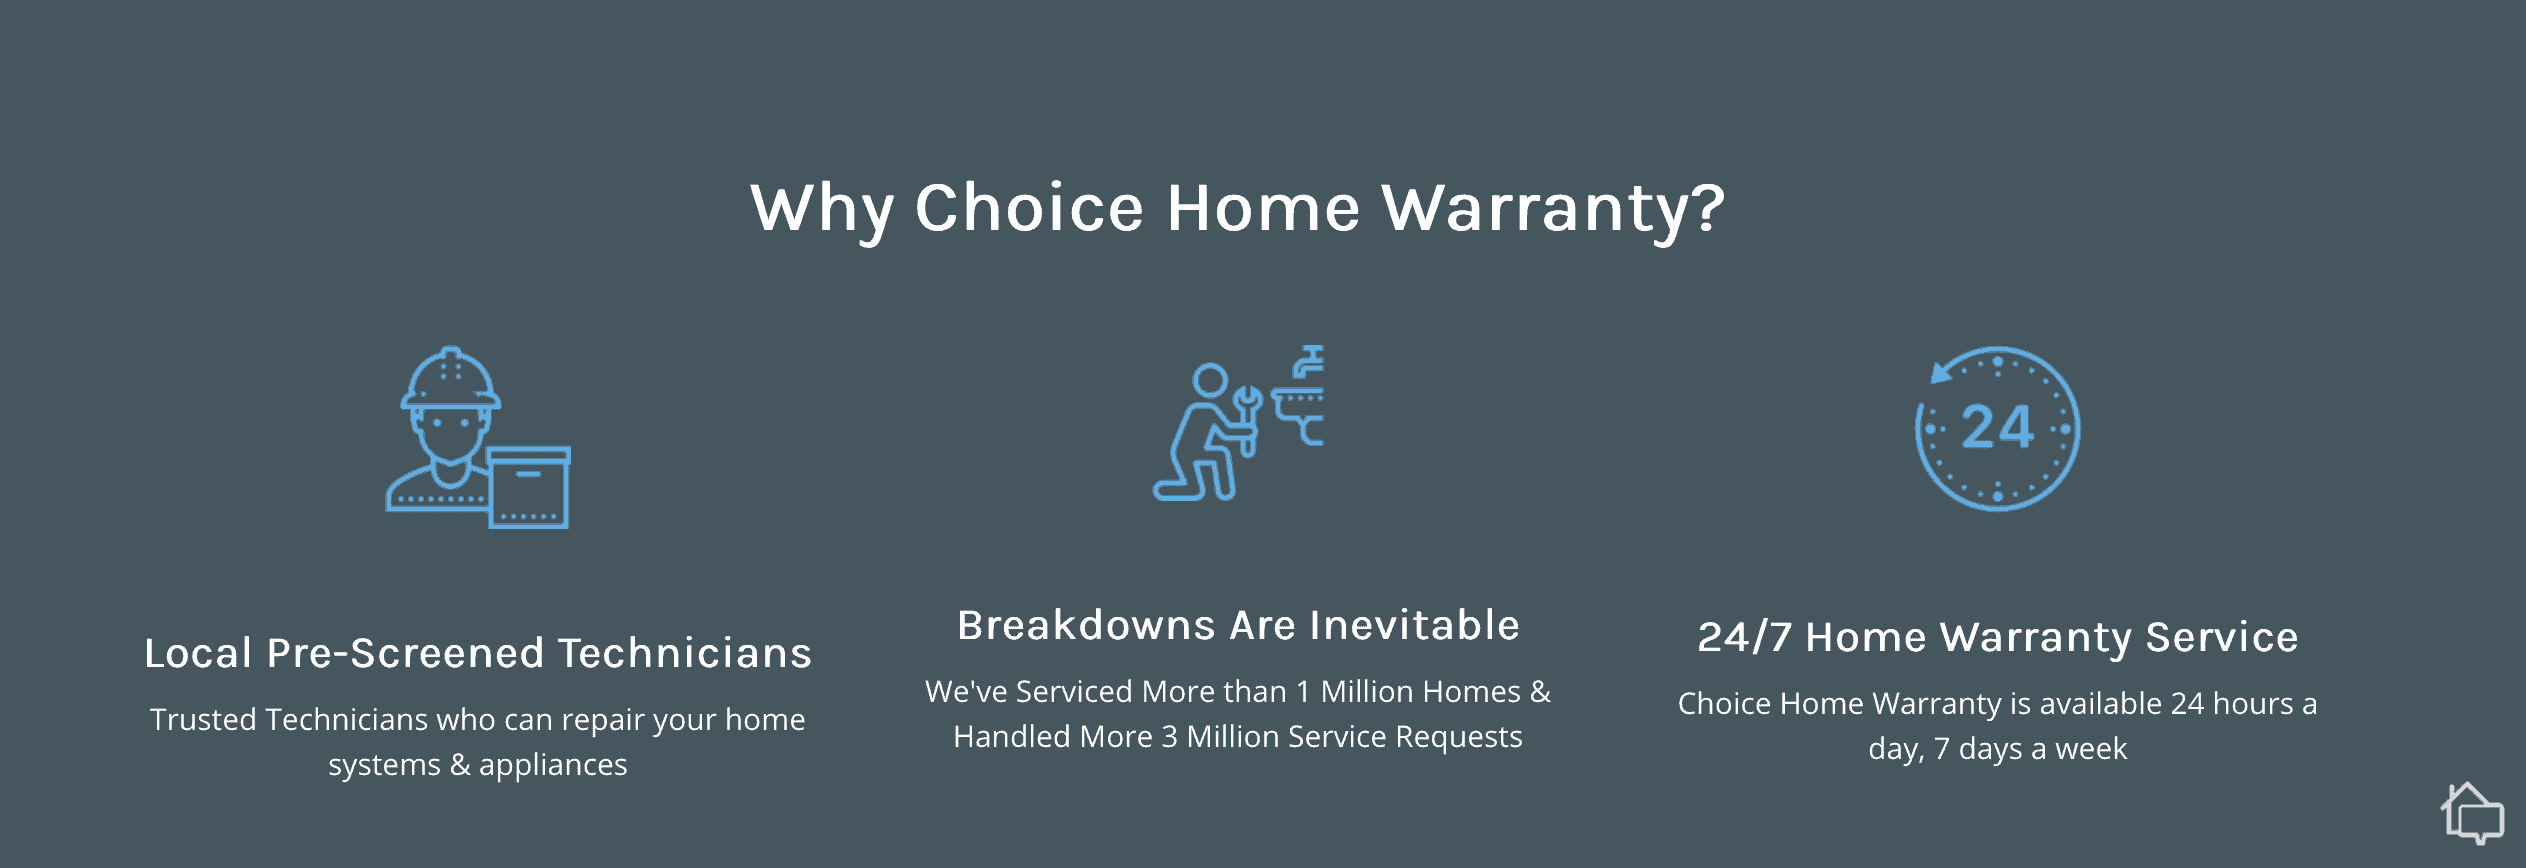 Choice's reasons for selecting home warranty protection